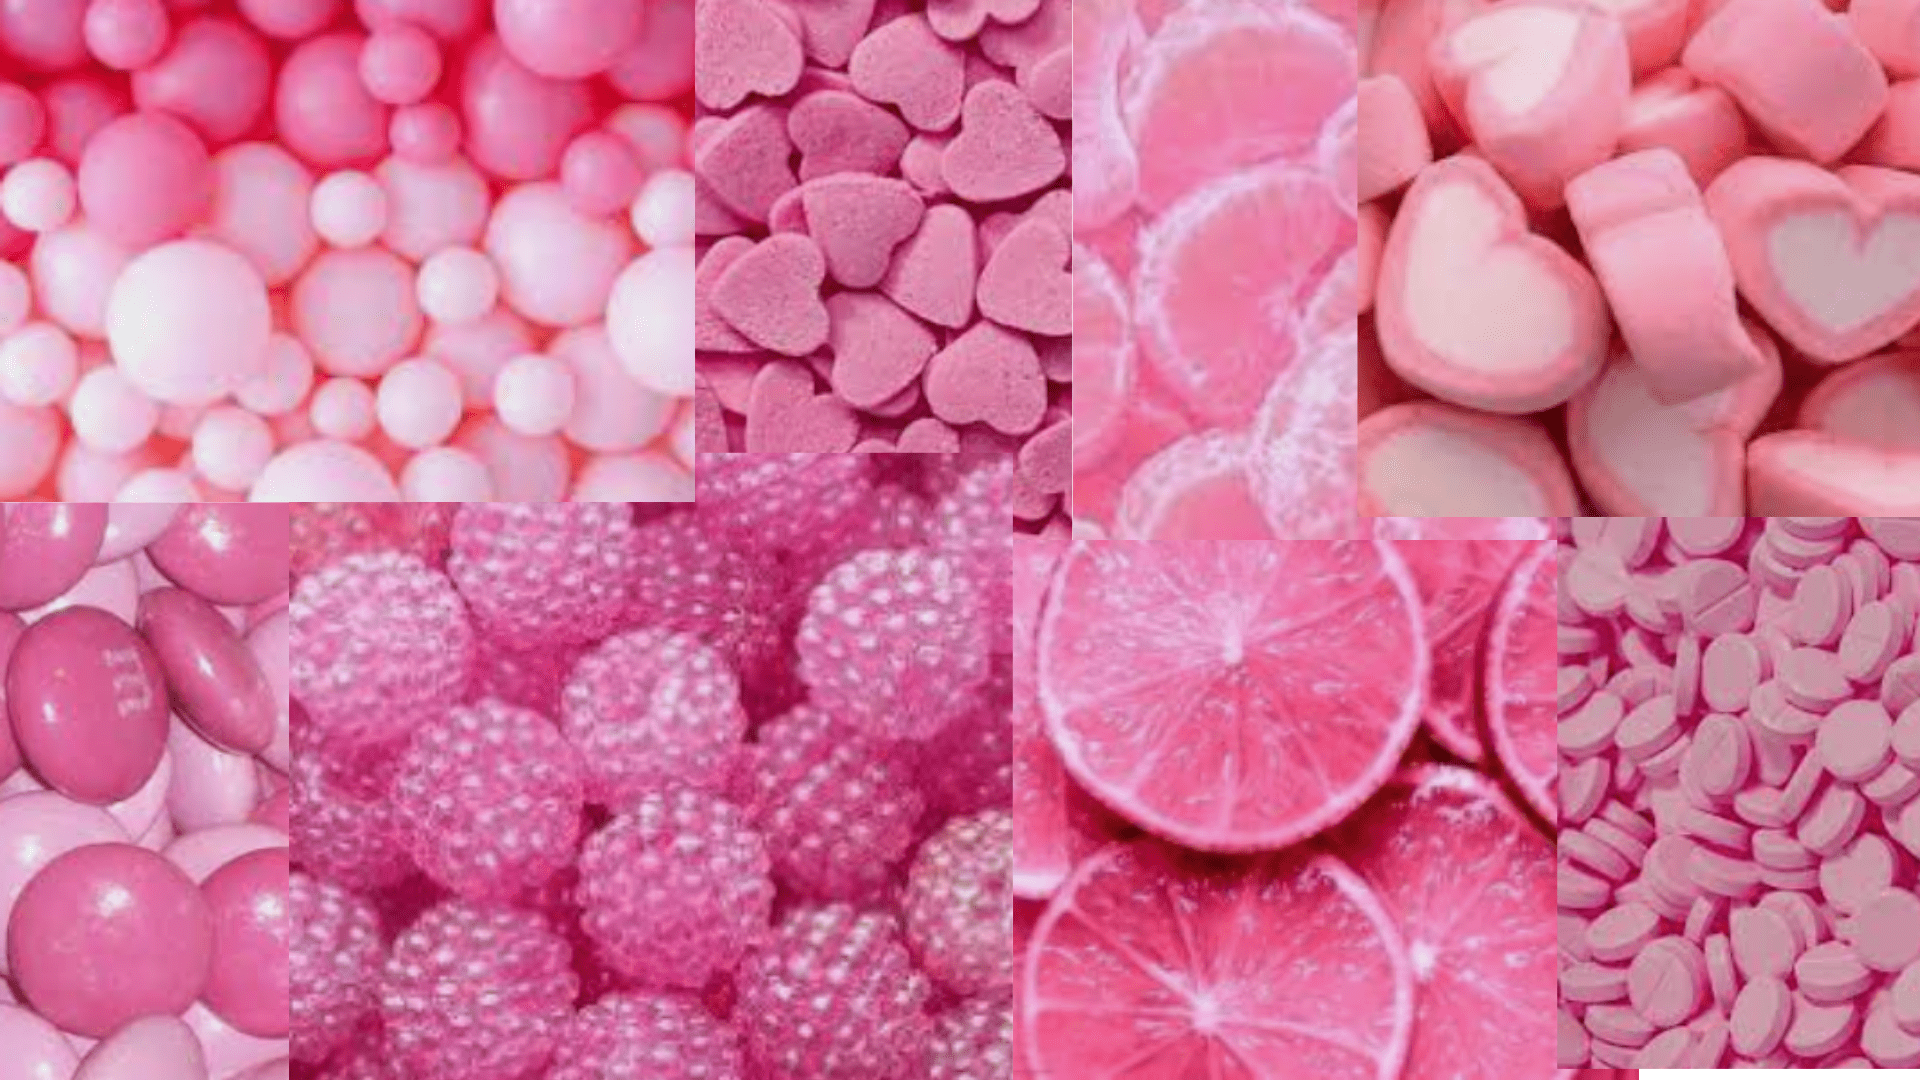 Aesthetic pink fruit & Candy